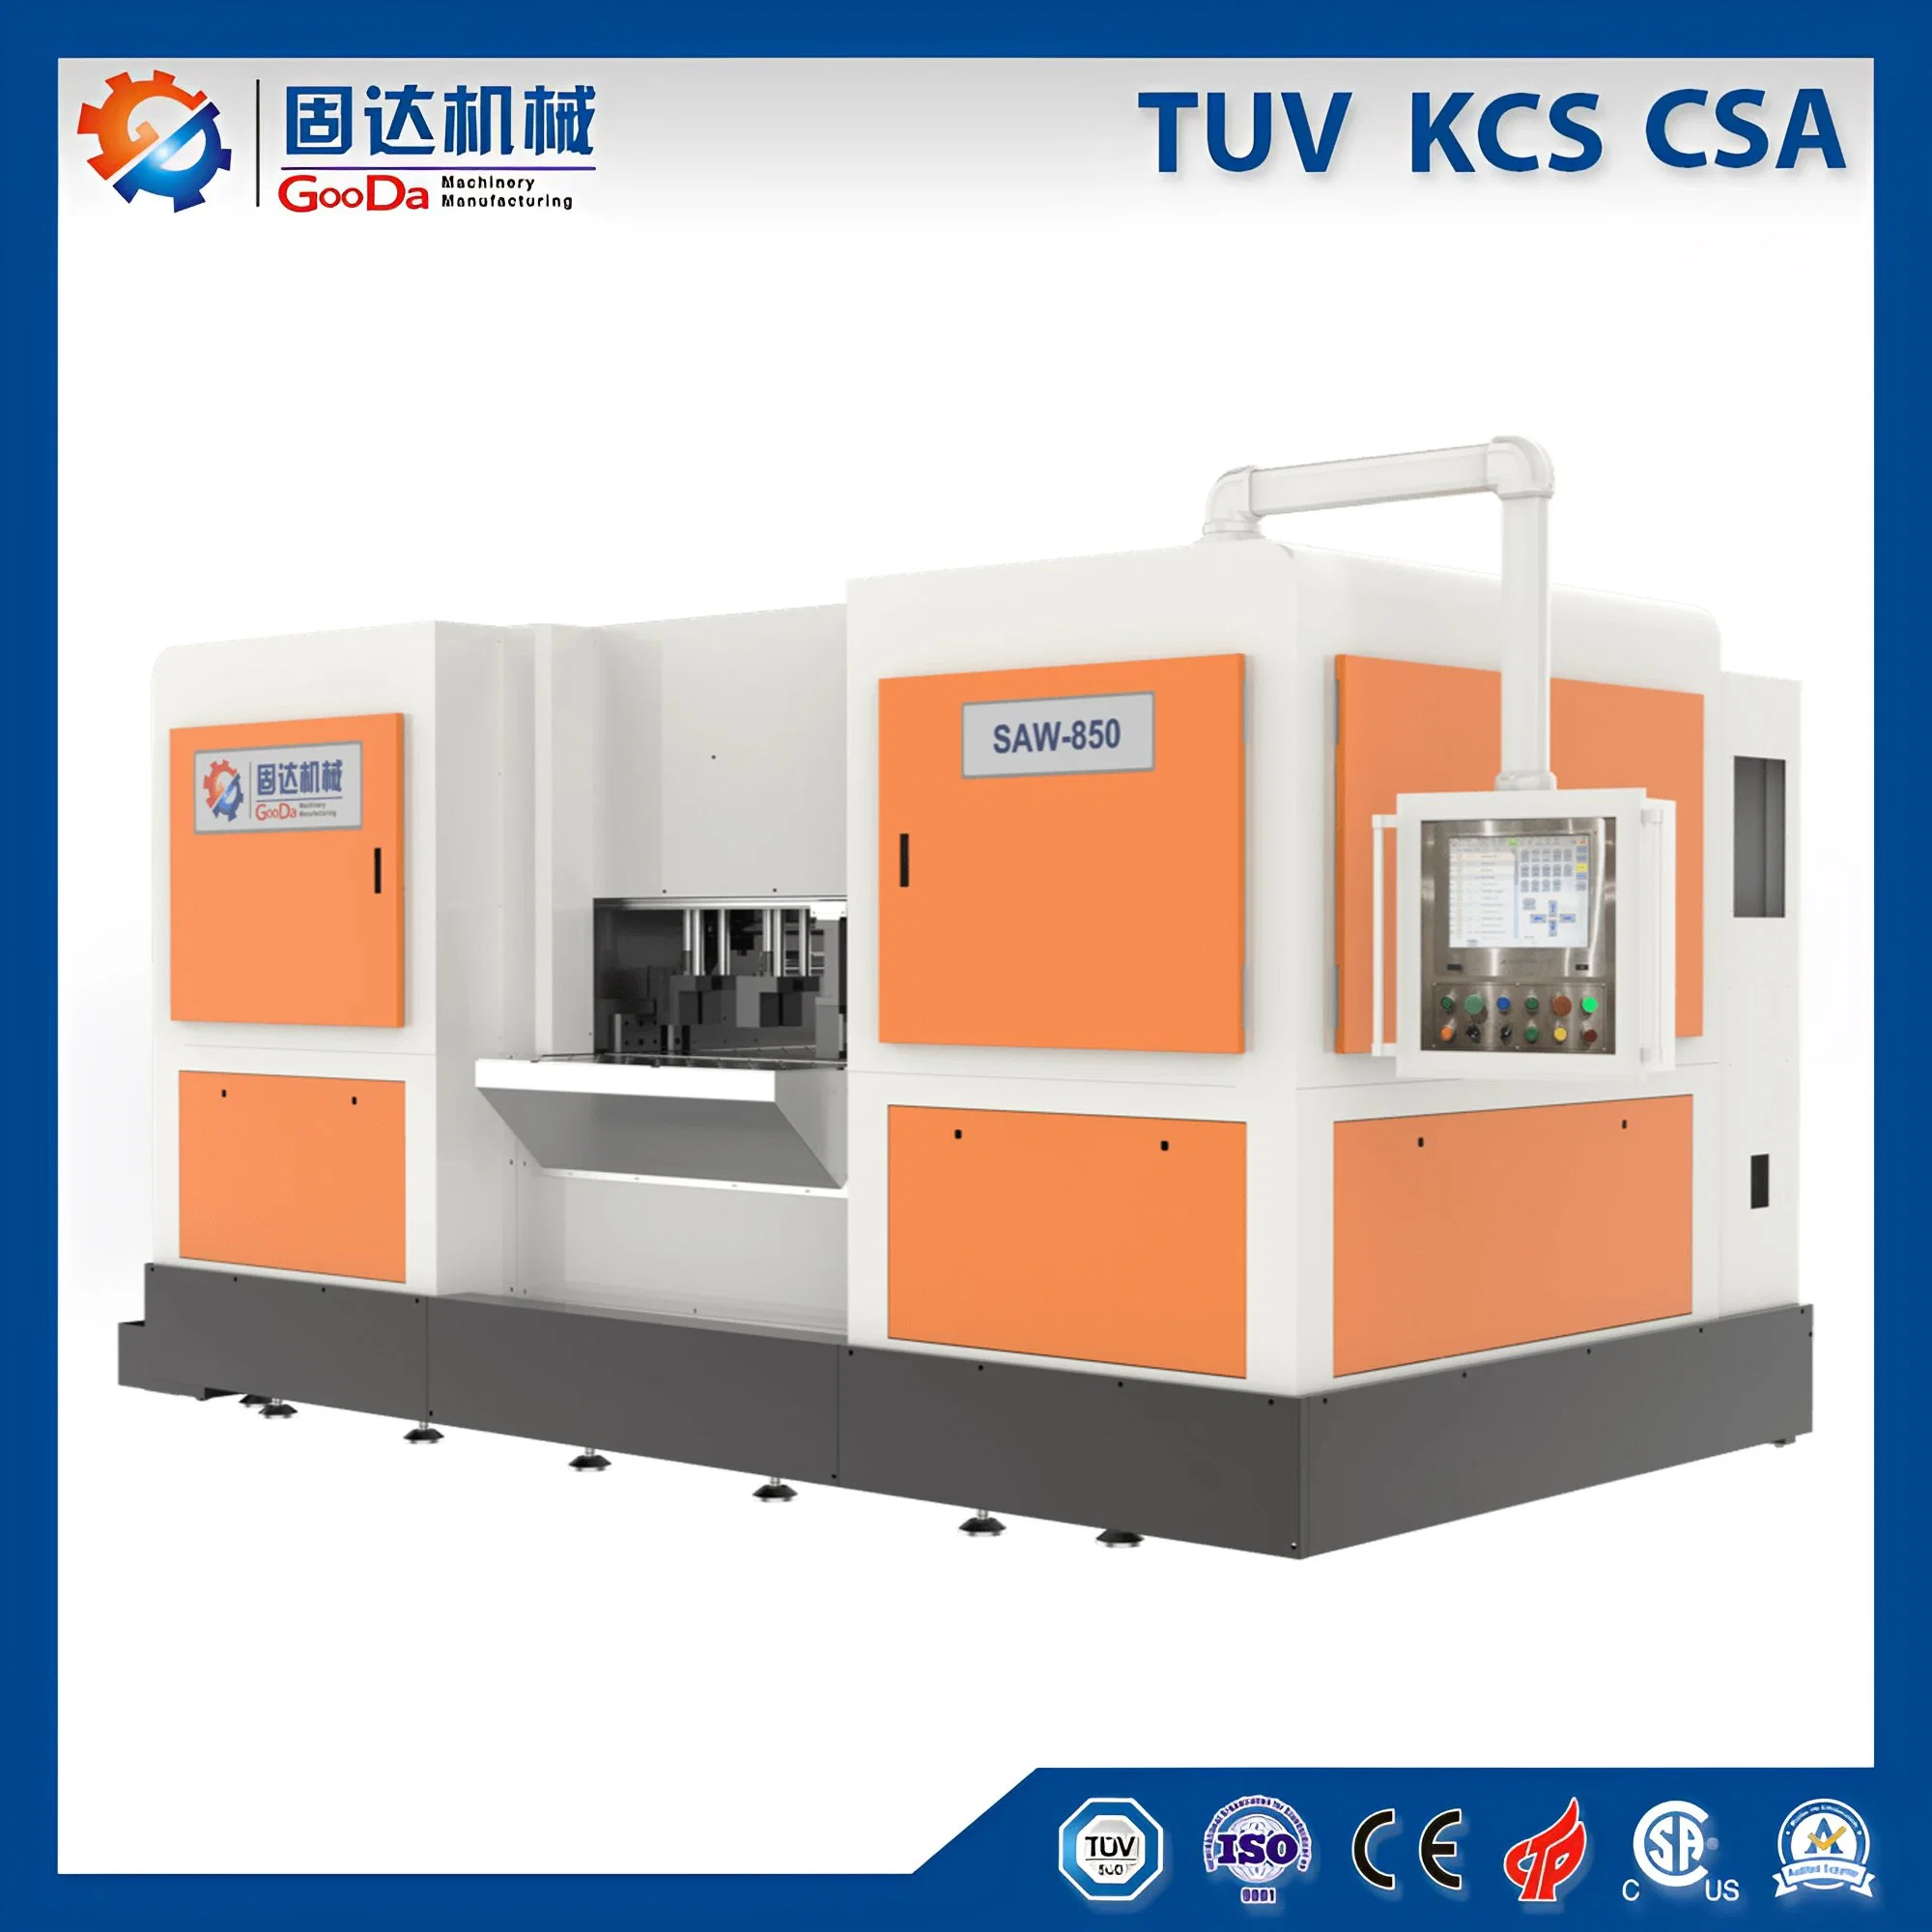 CNC Sawing Machine with Fast Cutting Speed and High Precision